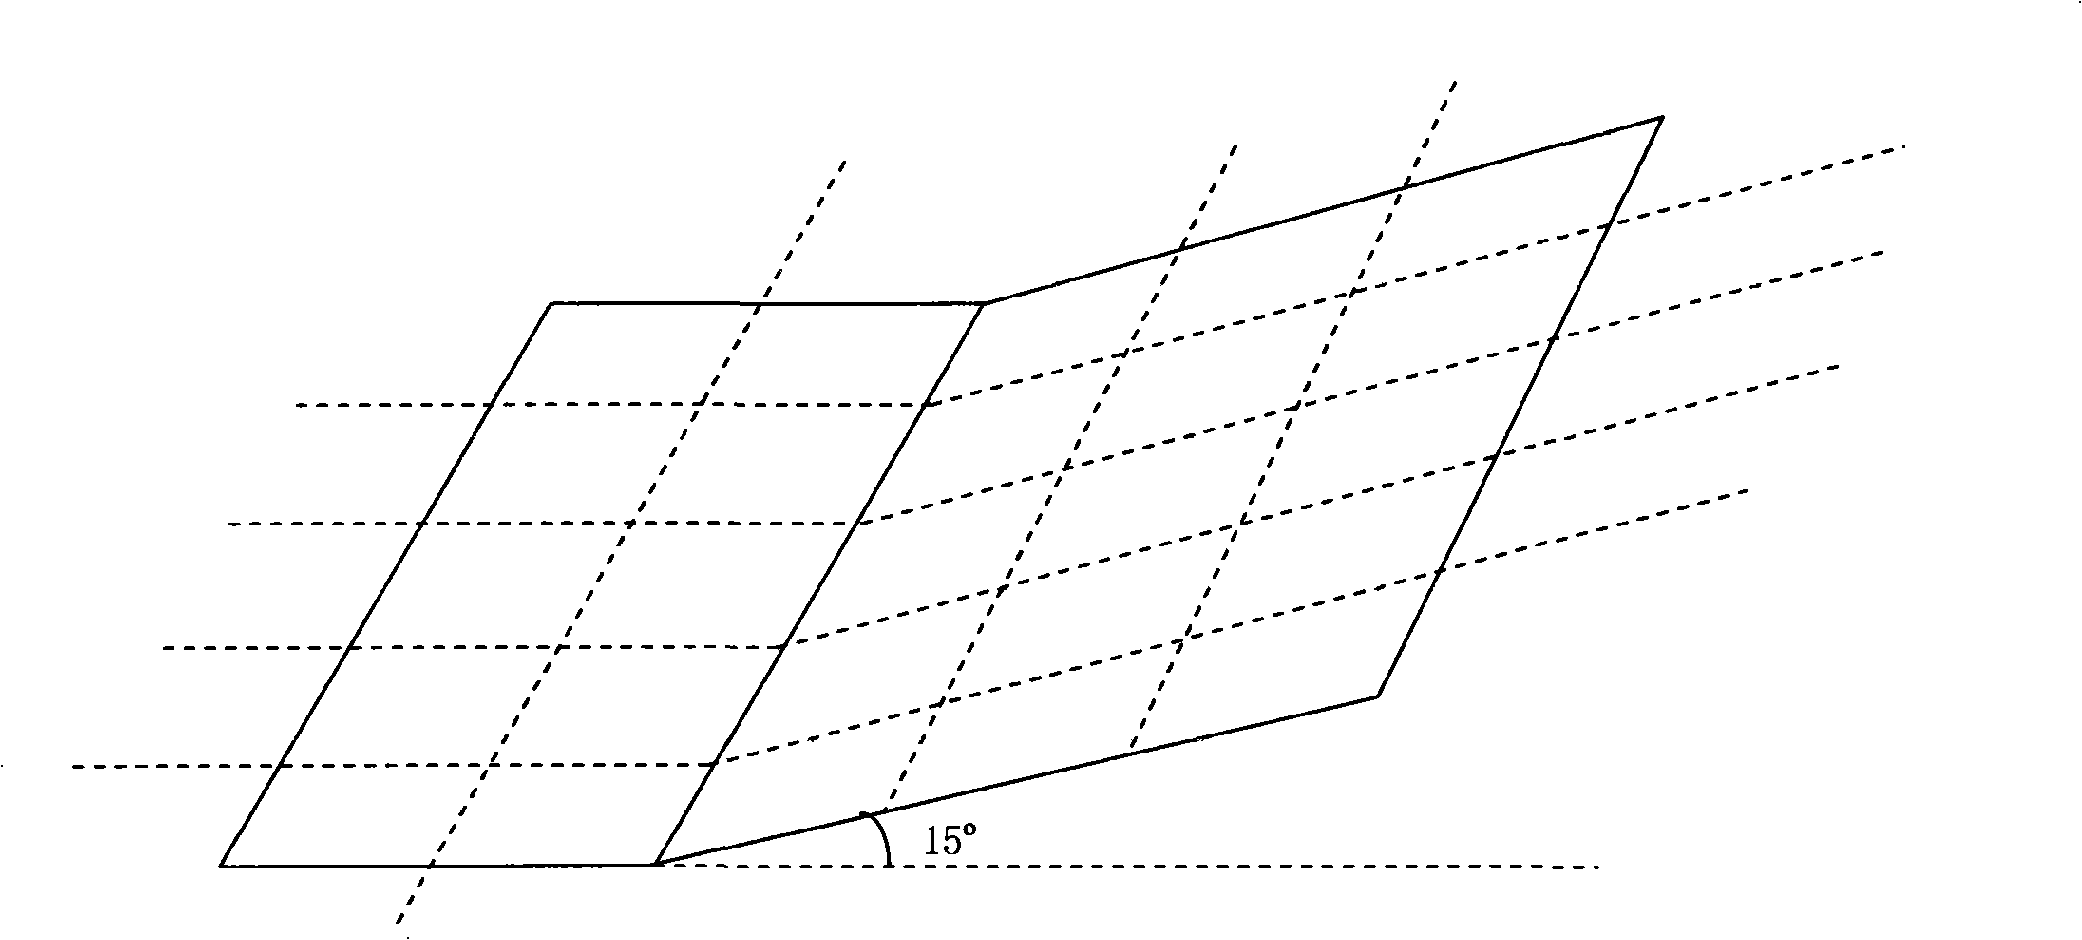 Space cost distance computing method based on raster data